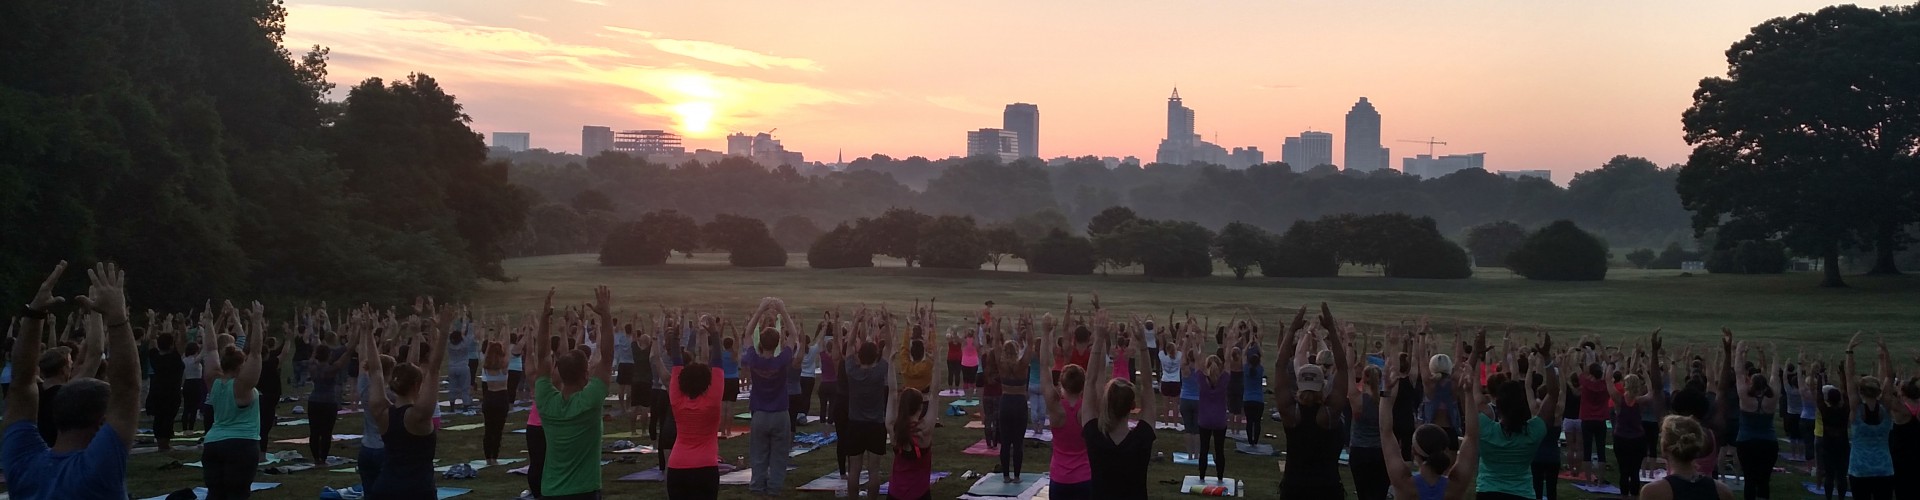 Crowd of people doing yoga in a field at Dix Park with the sun rising in the background